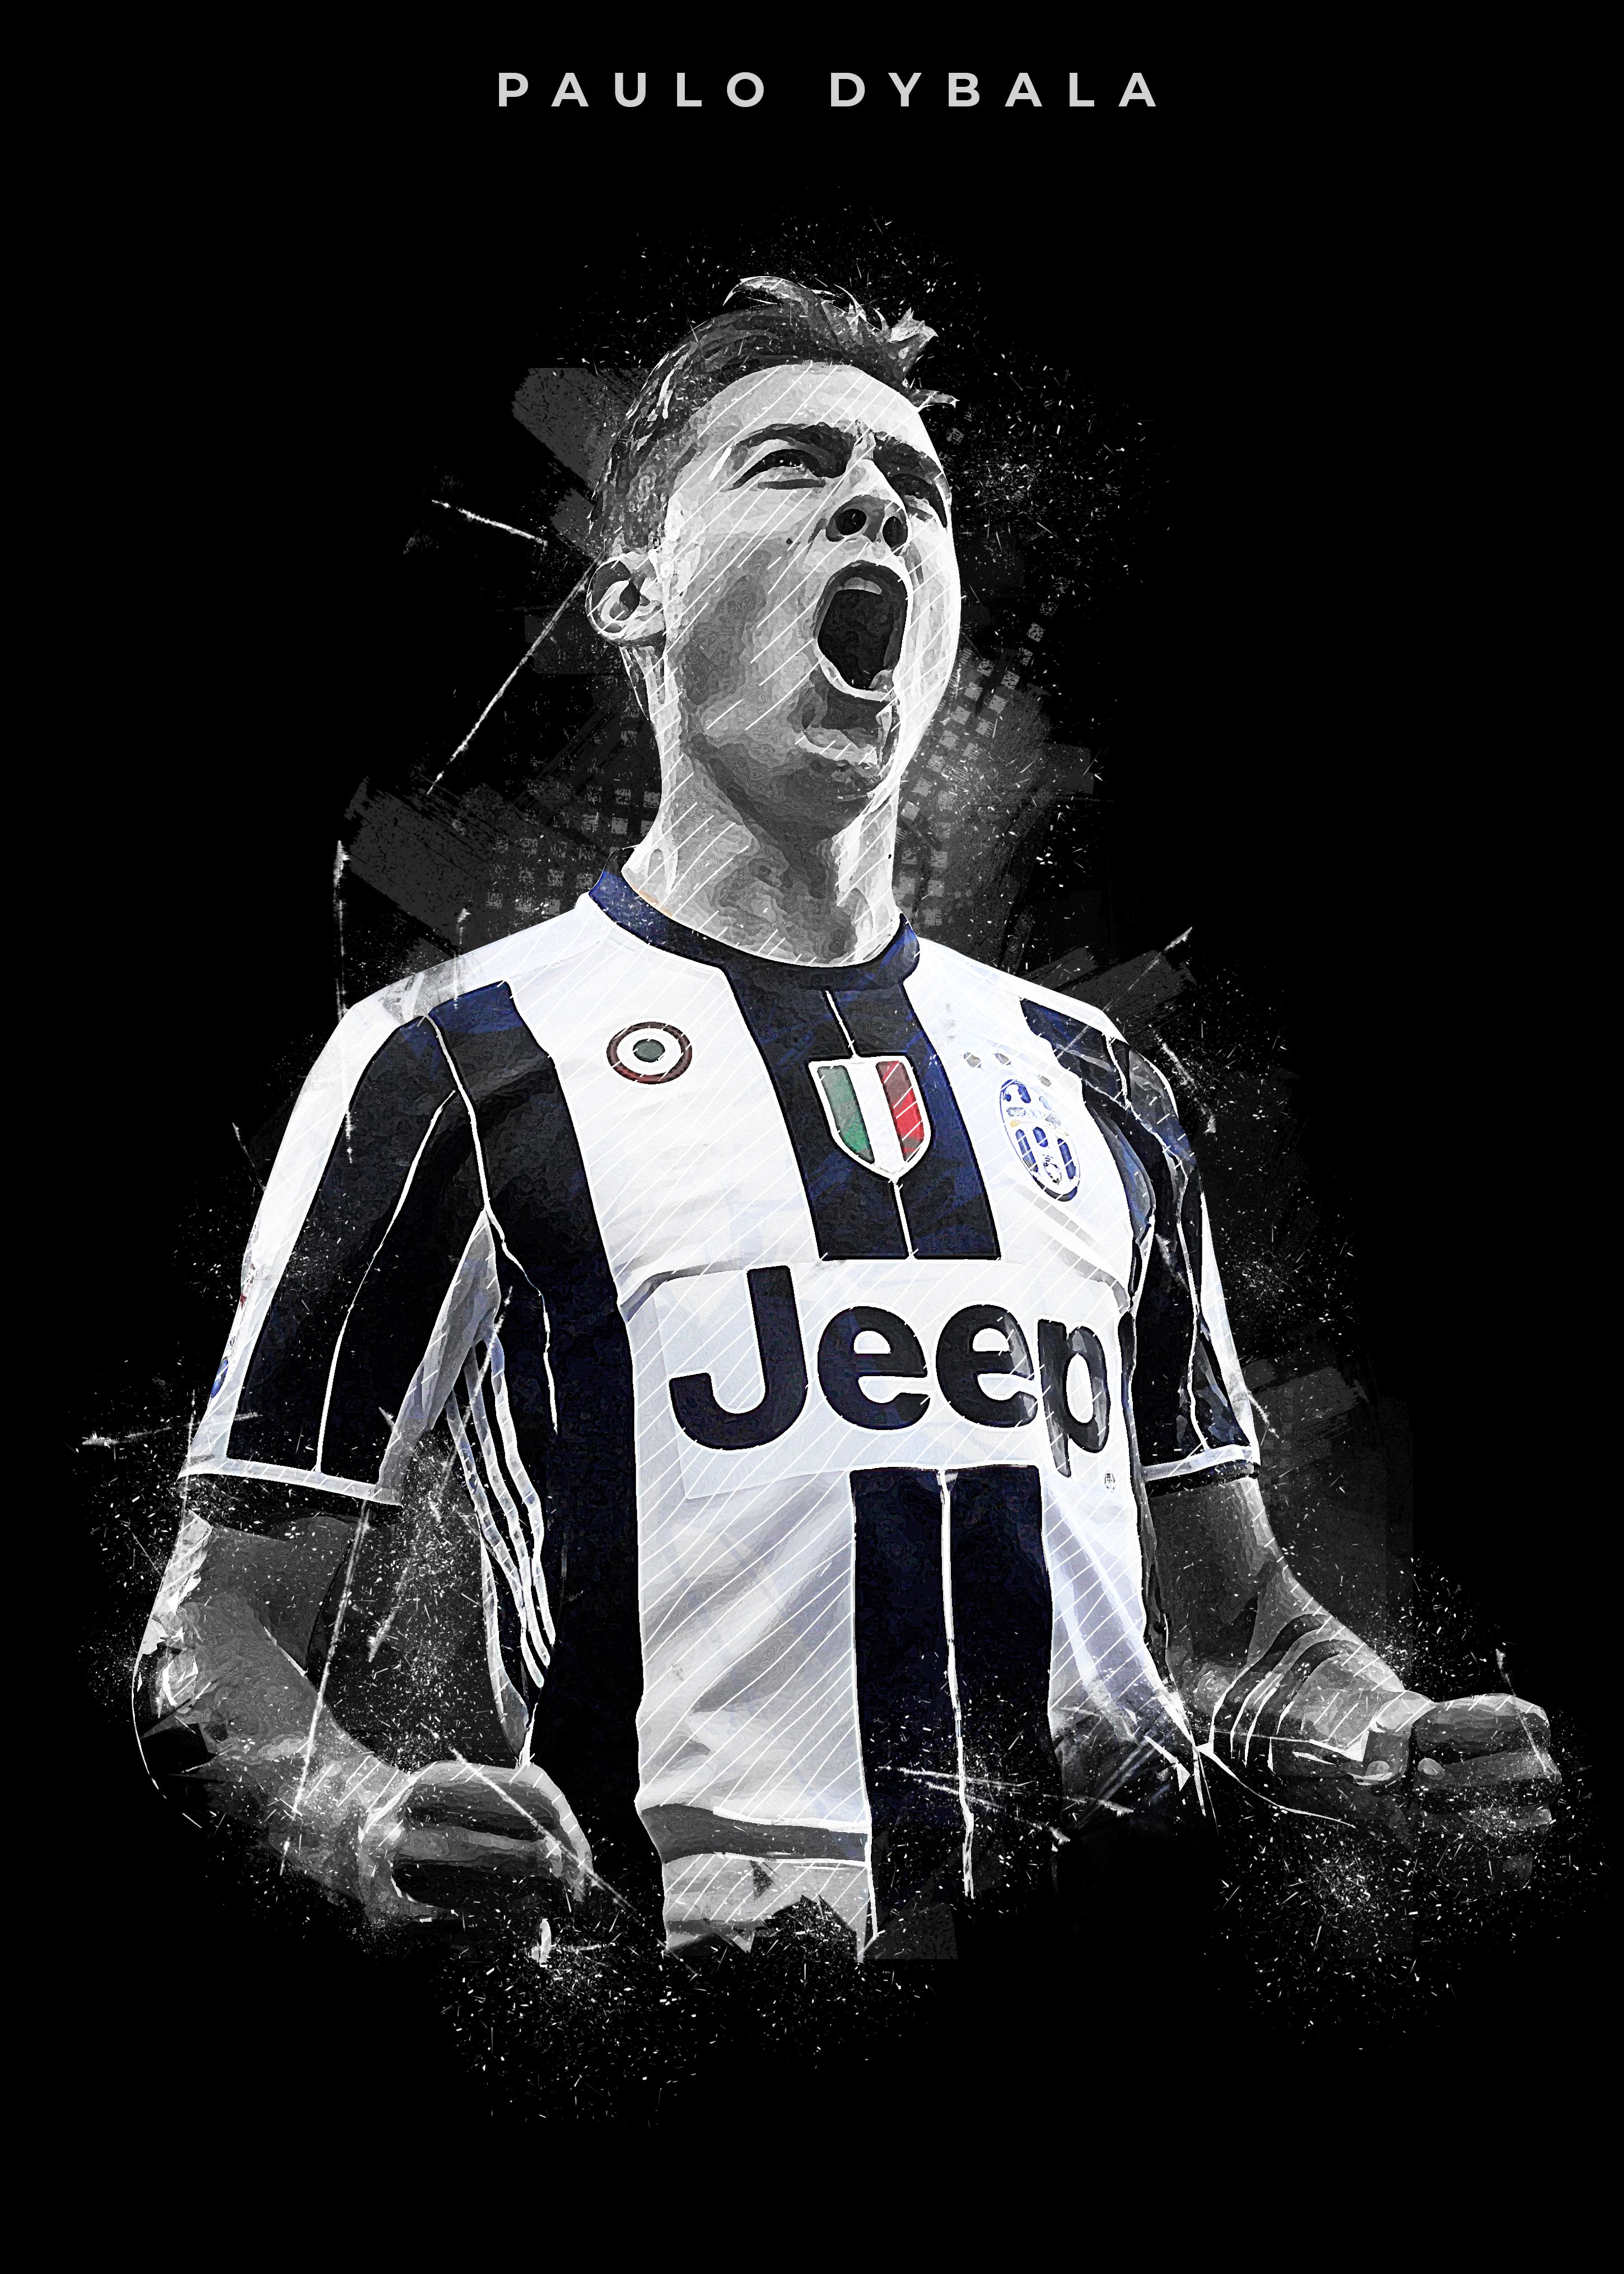 Paulo Dybala' Poster by Creative Shop. Displate. Soccer picture, Football poster, Neymar jr wallpaper